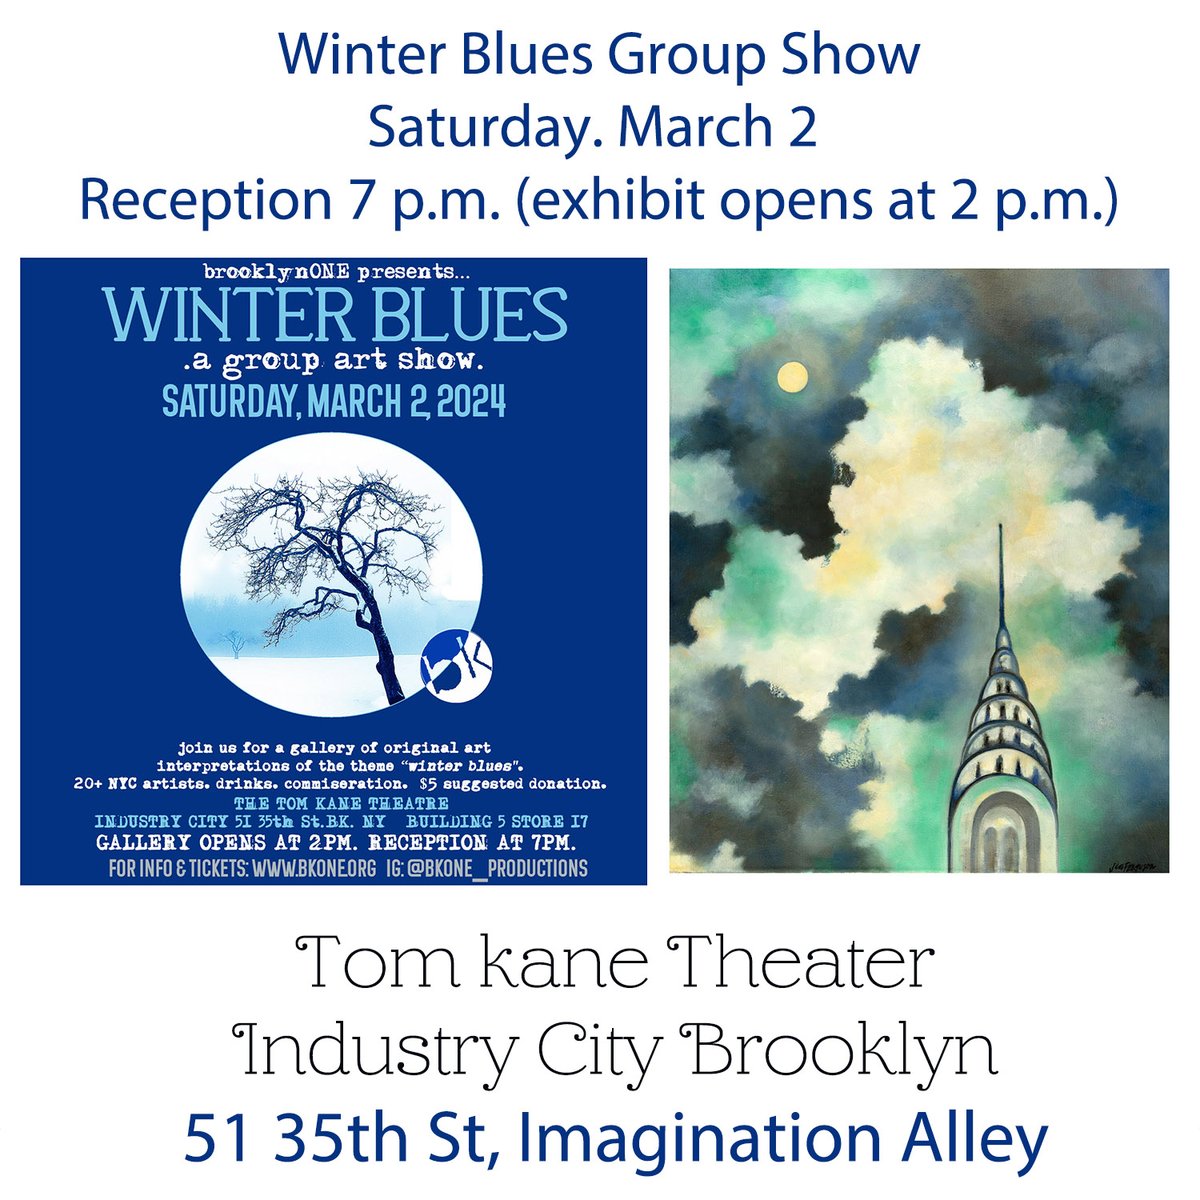 'Winter Blues' exhibit opens Sat. March 2 at the Tom Kane Theater, Industry City patch.com/new-york/sunse…